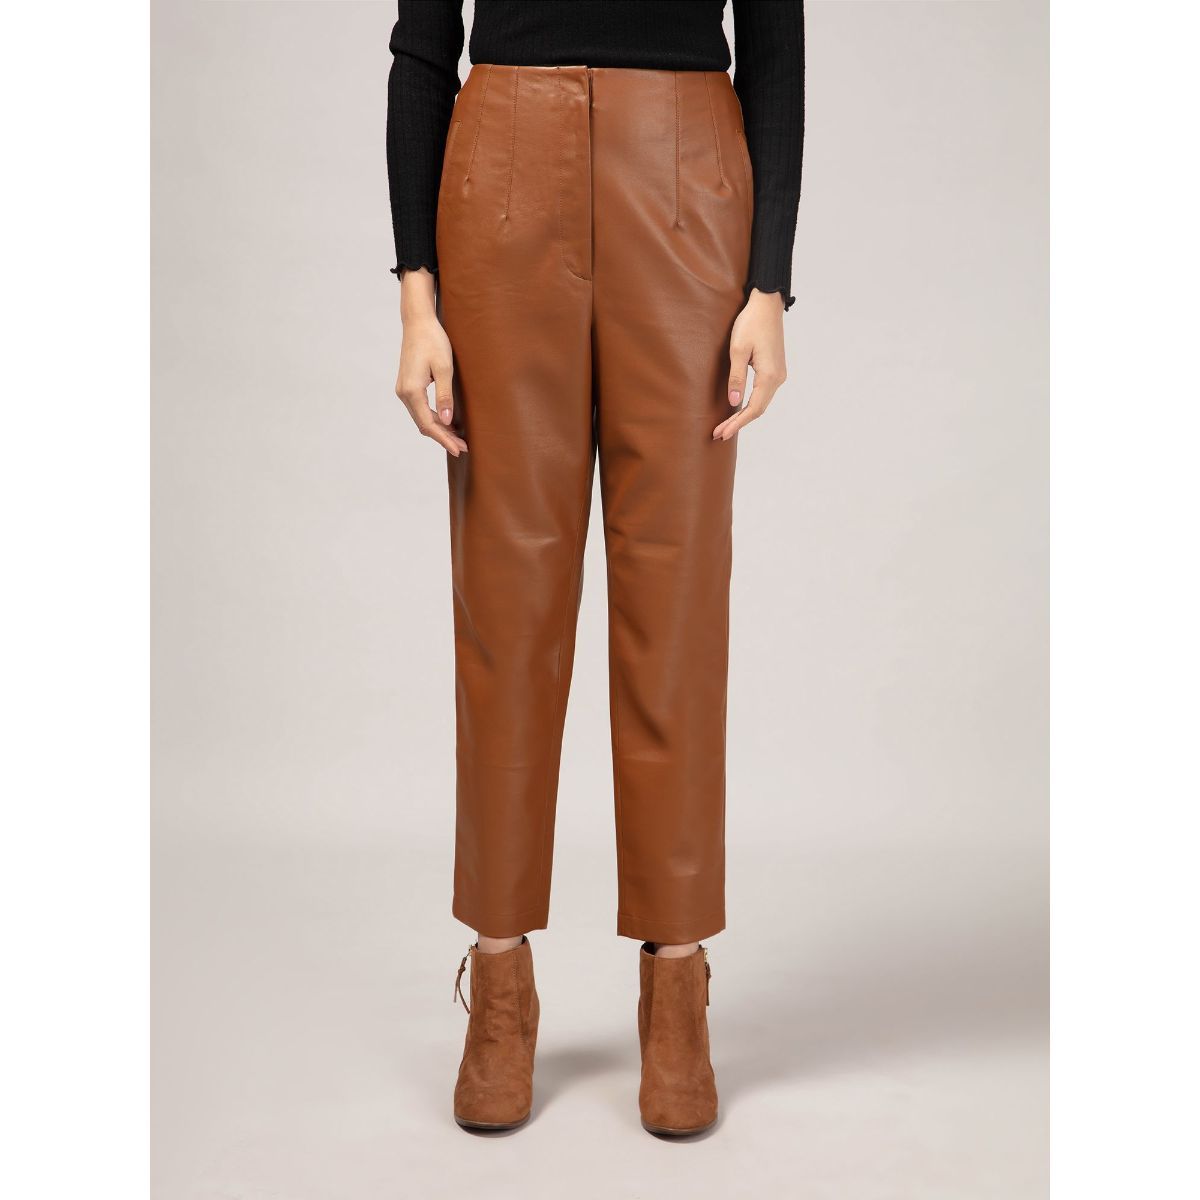 PullBear faux leather flare pants in brown  ASOS